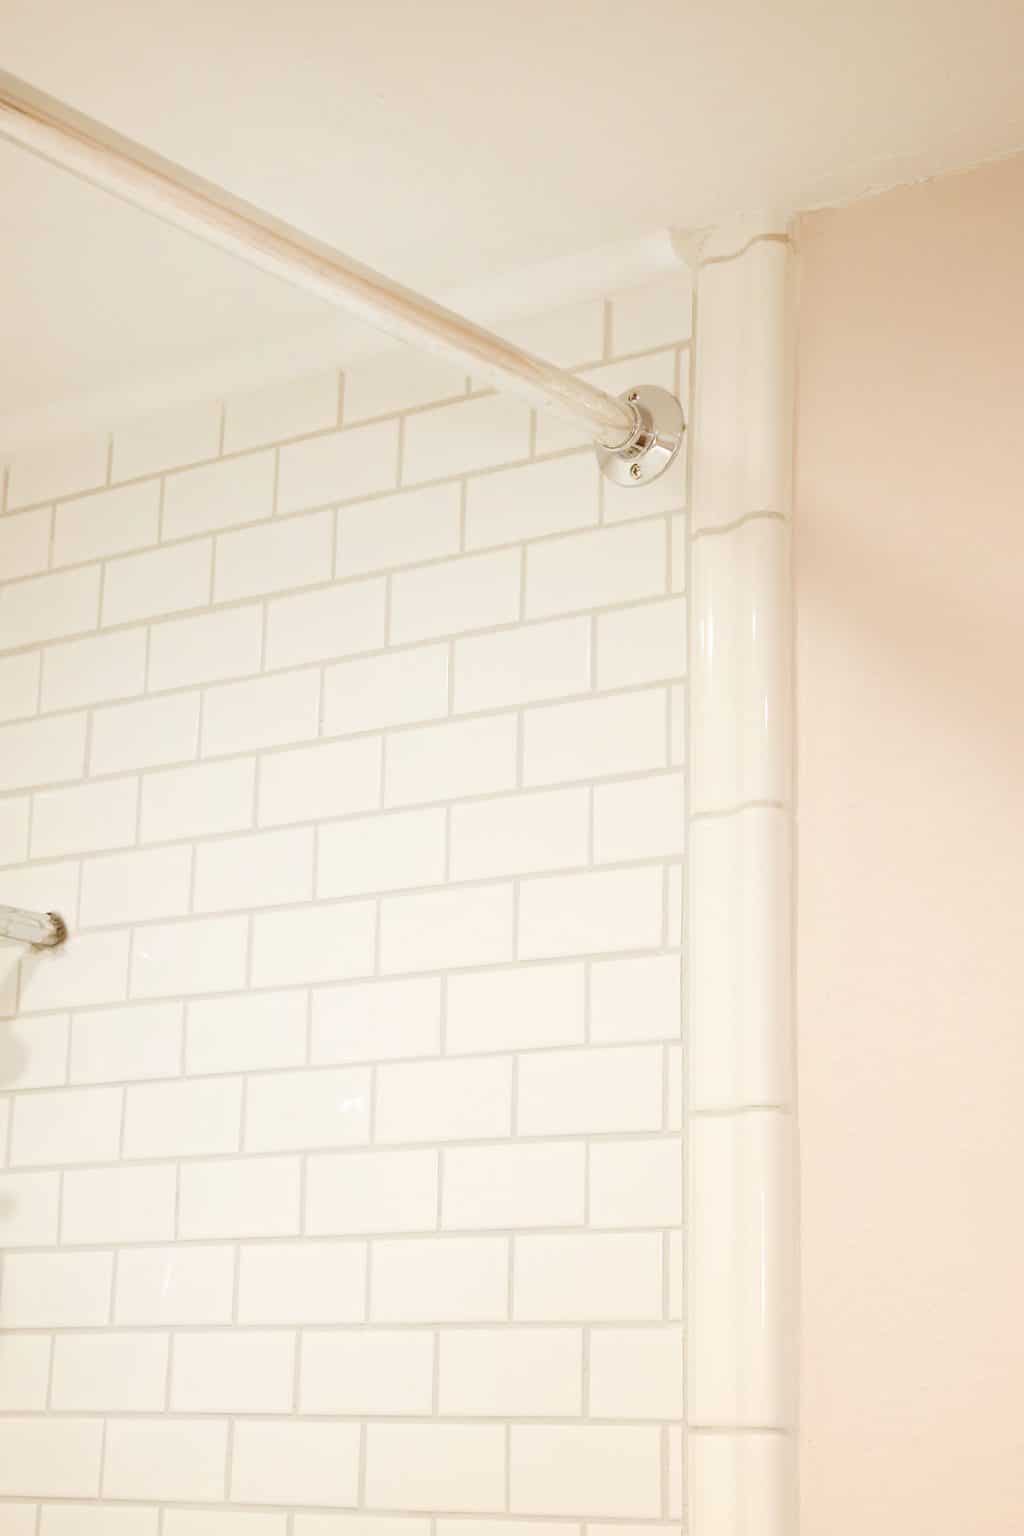 Tile To Hang A Shower Curtain, How To Install A Curved Shower Curtain Rod On Tile Floor